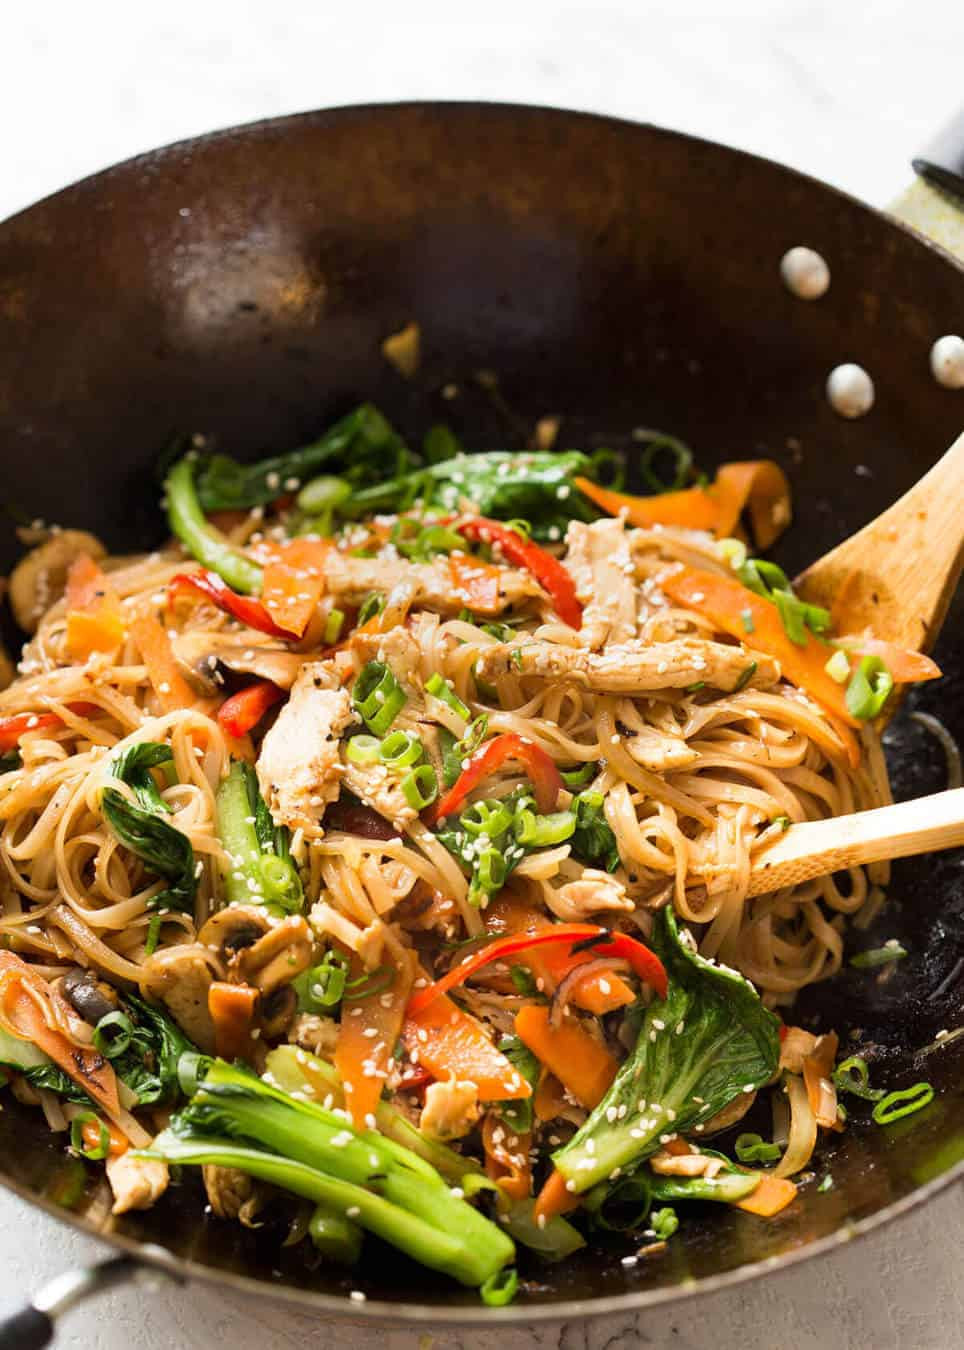 Stir Fry With Noodles
 Chicken Stir Fry with Rice Noodles